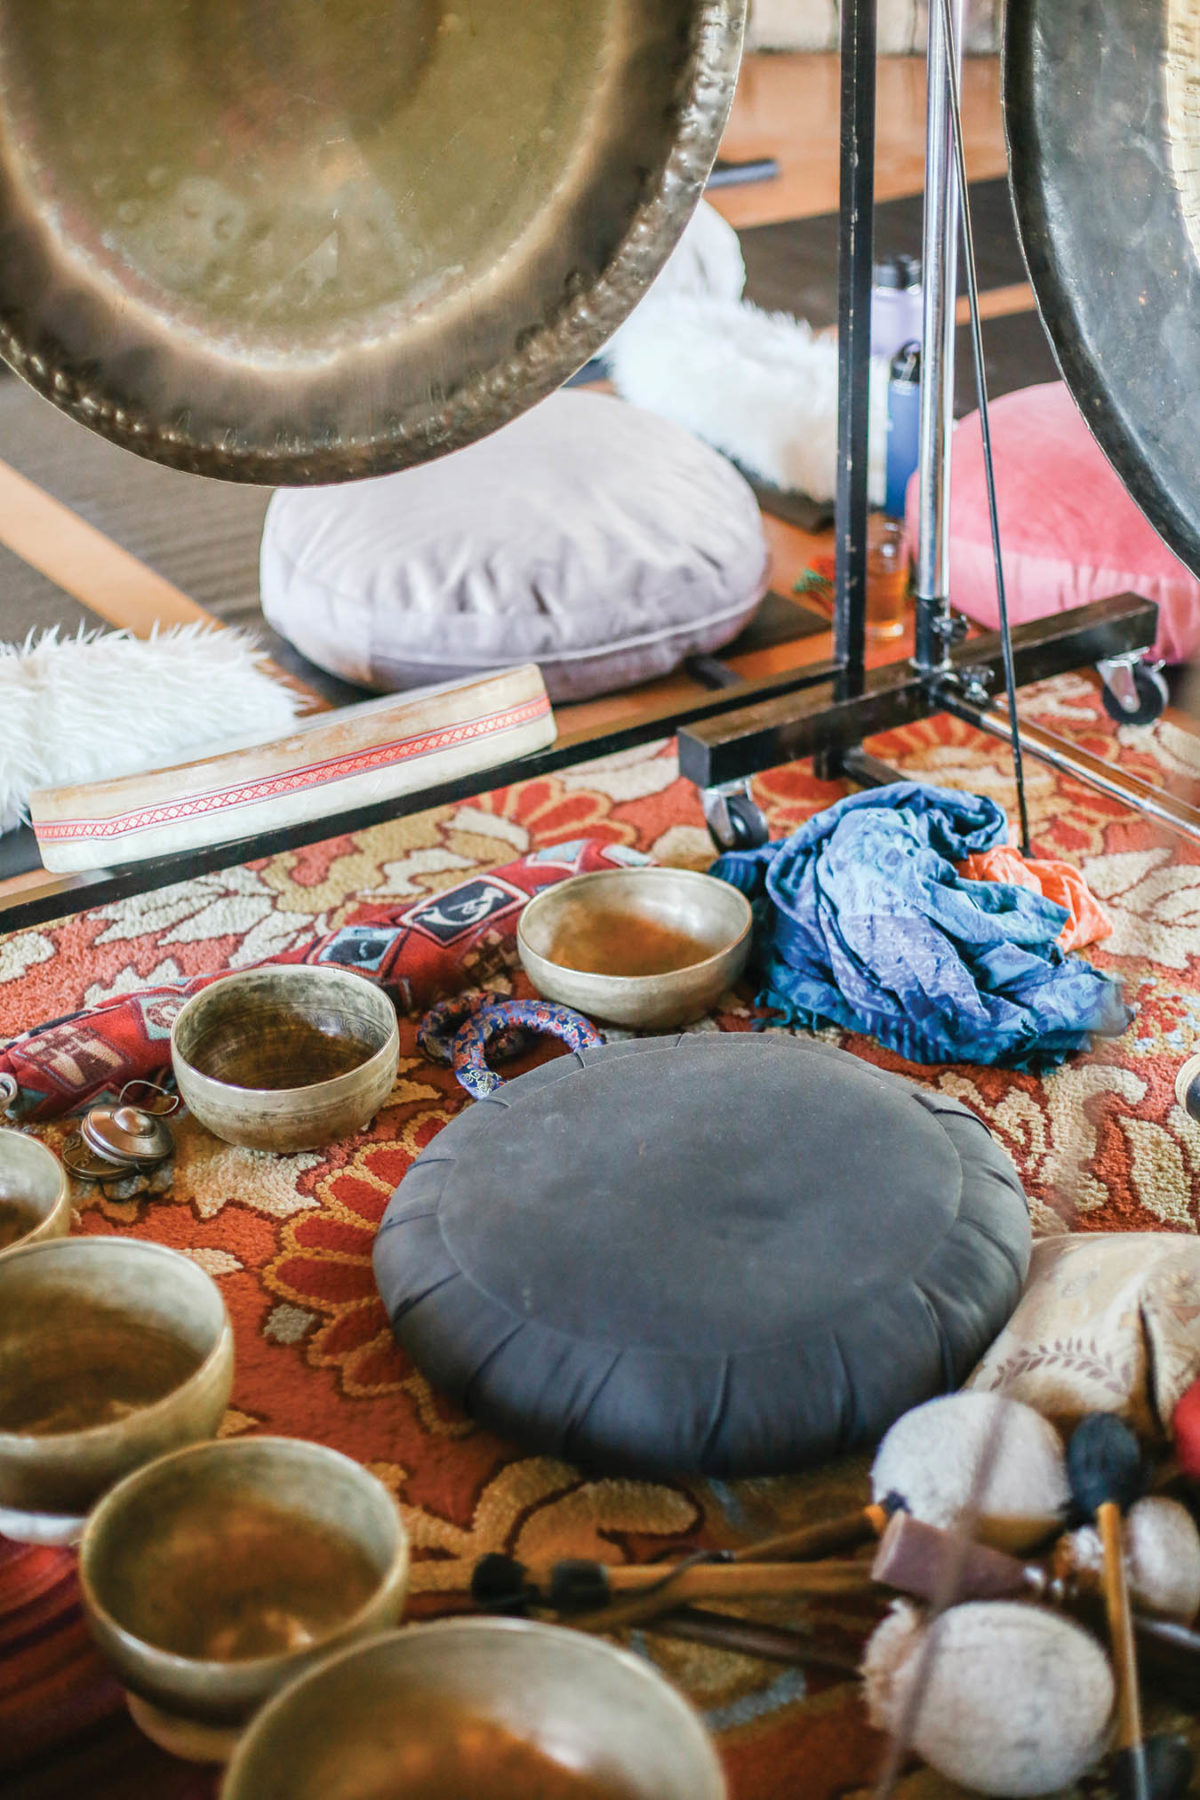 A sound bath setup with pillows, blankets and bowls.